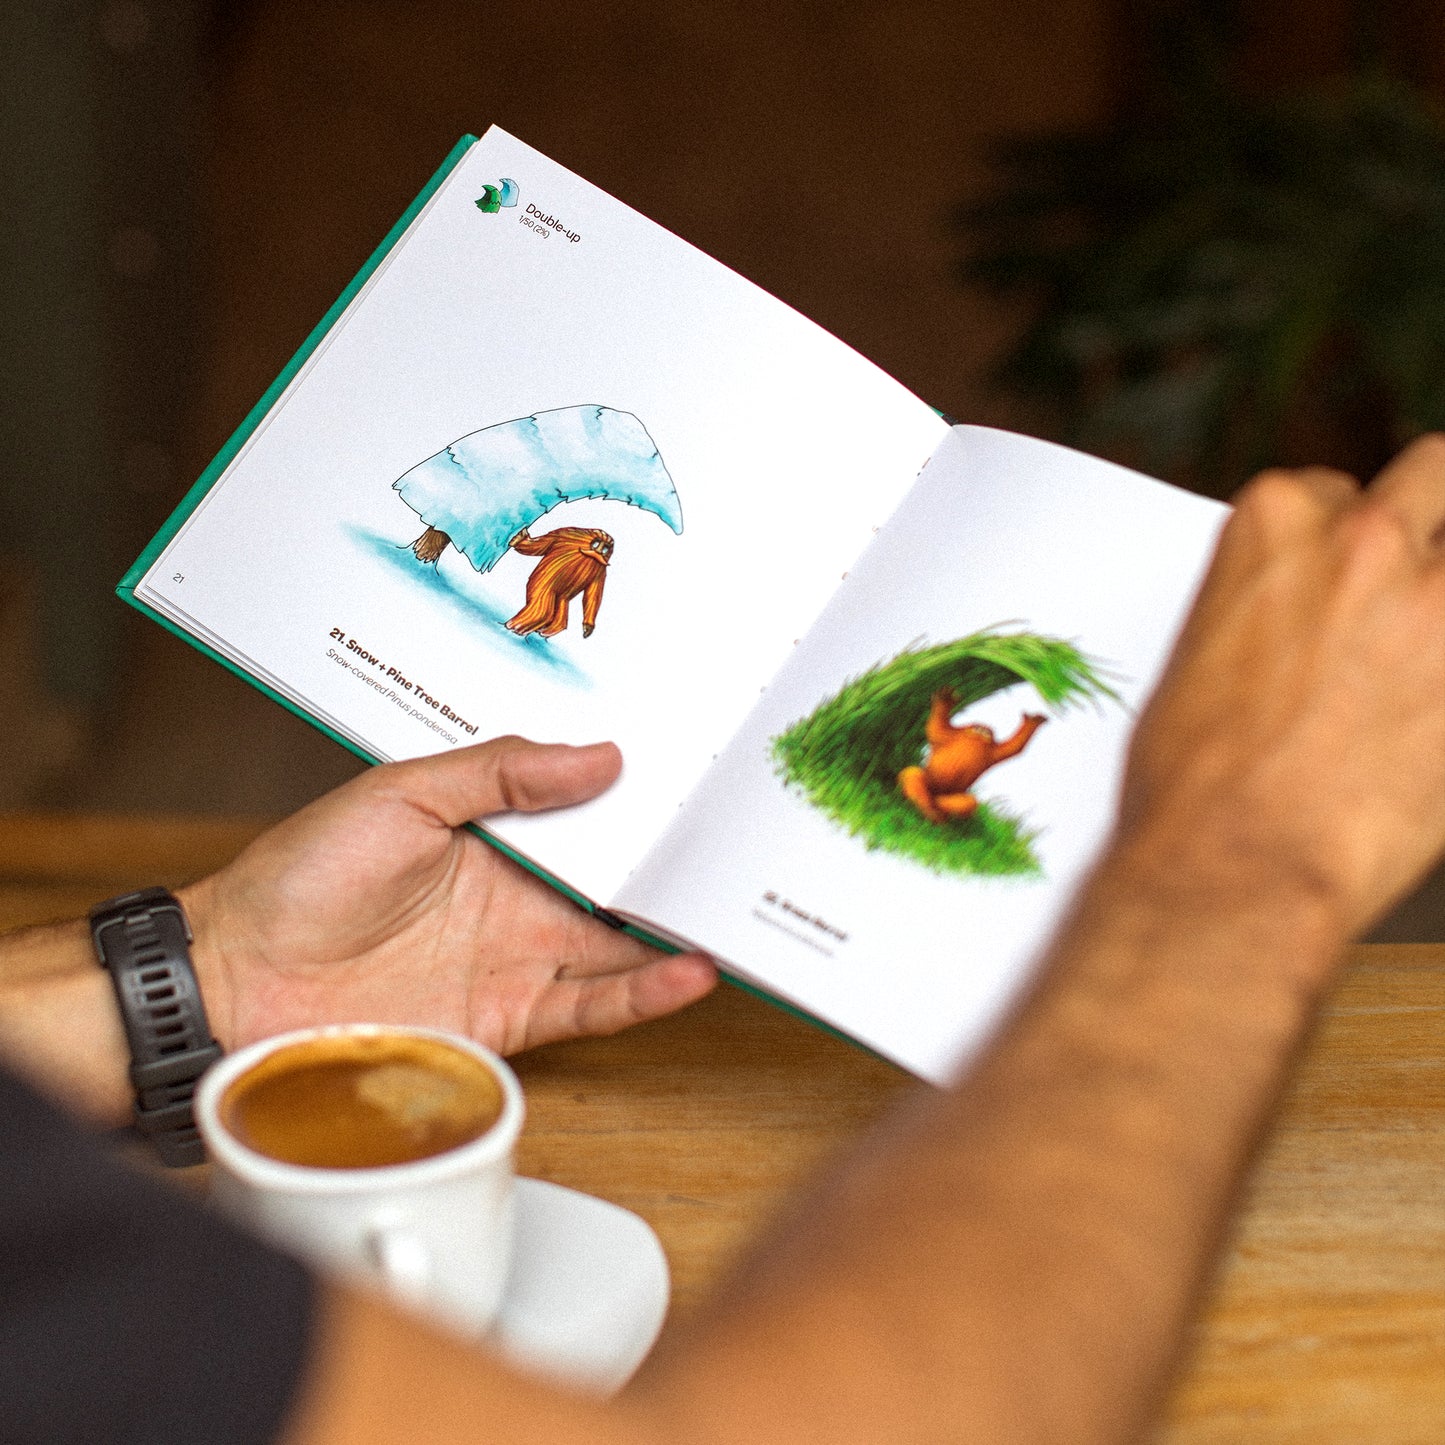 An open hardcover book on a wooden table showing two pages, with illustrations of a figure under a snow-covered pine tree wave on the left and a figure under tall grass in the shape of a wav,. There is a cup of espresso on the side.